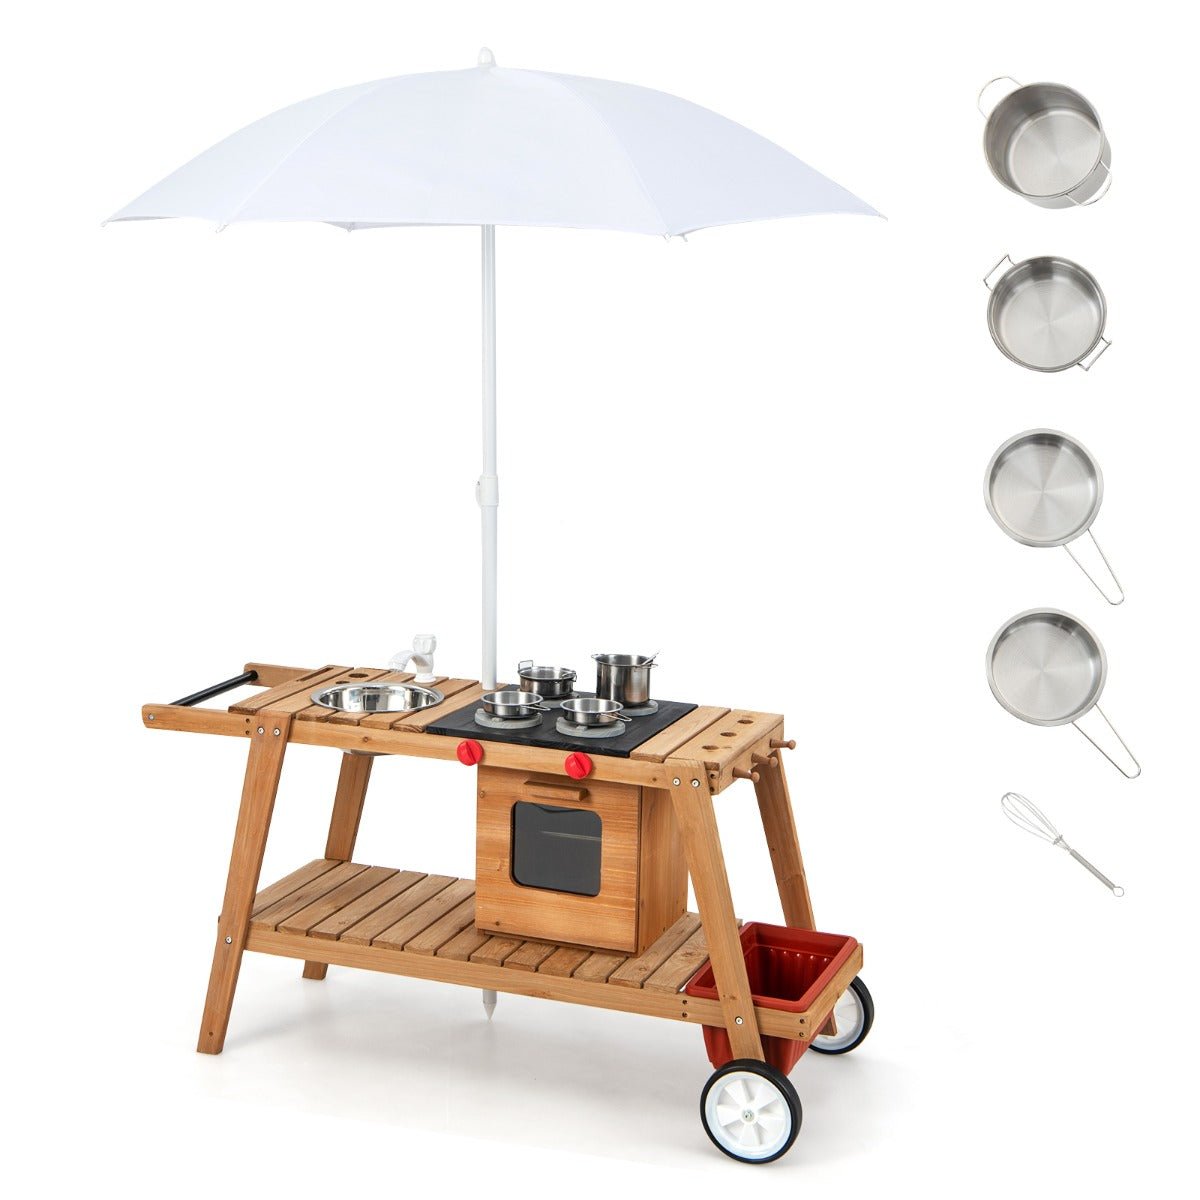 Get Grillin': Outdoor Cooking Set Pretend Trolley with Umbrella